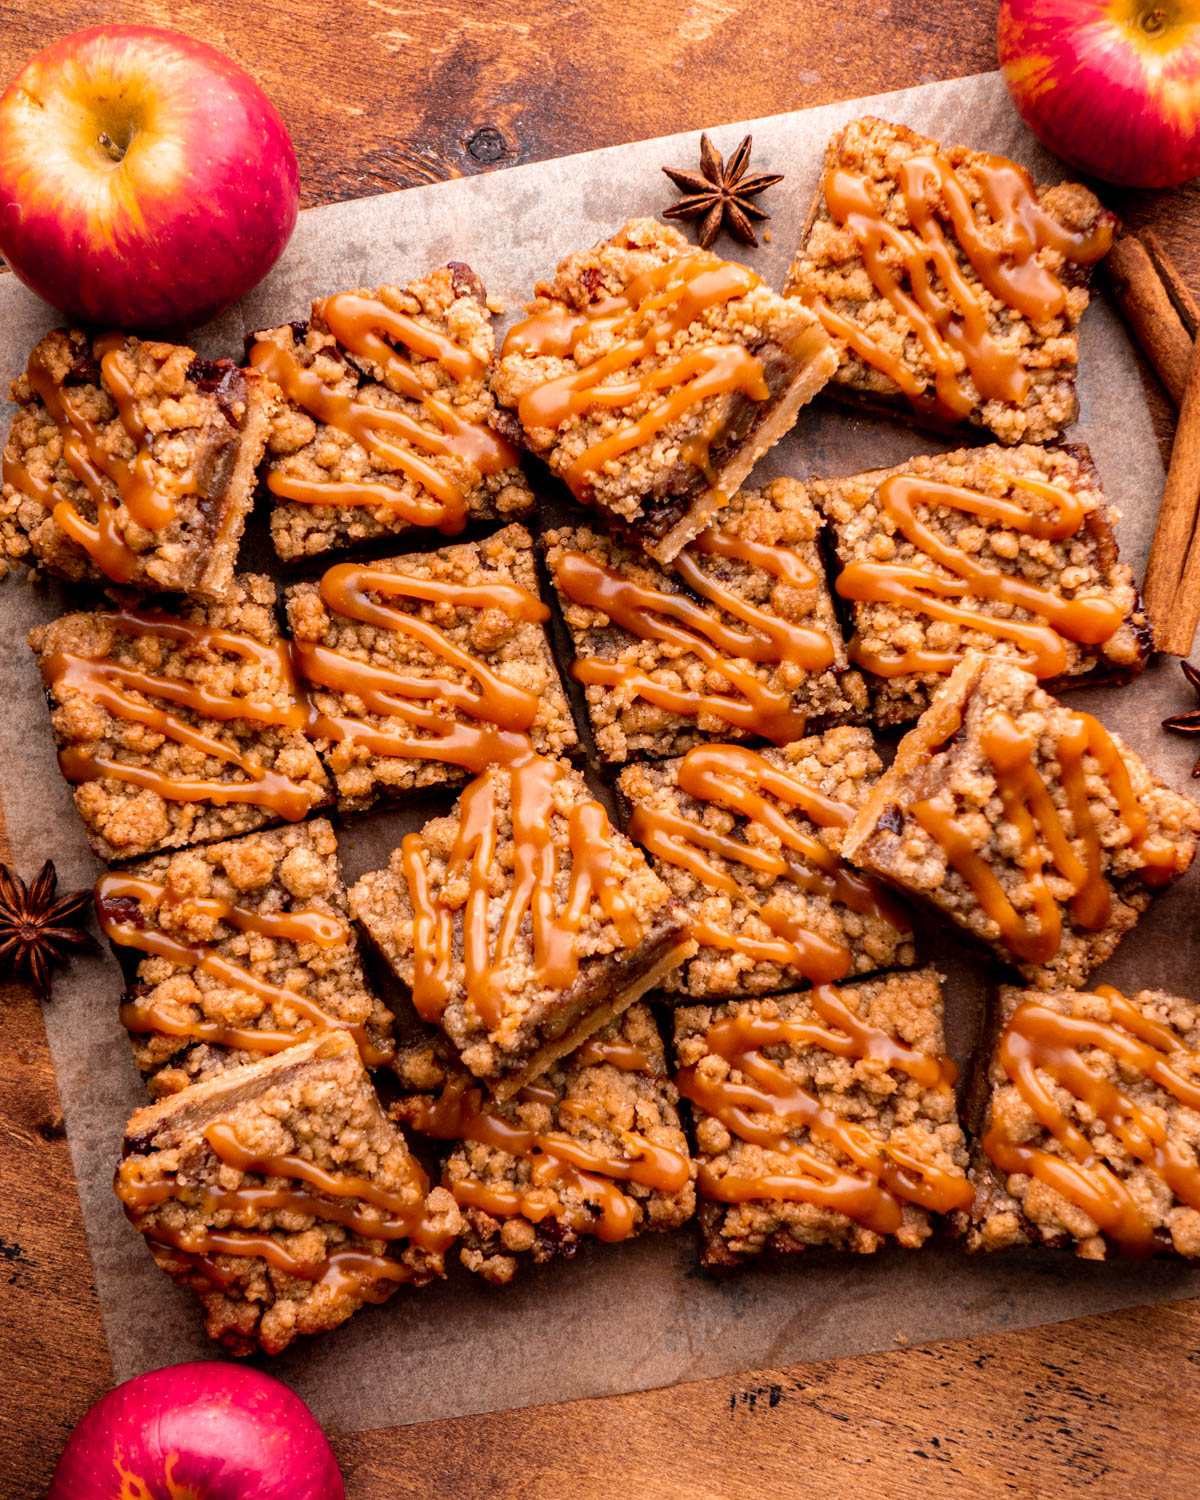 apple pie bars arranged on parchment paper with apples, cinnamon sticks and star anise around